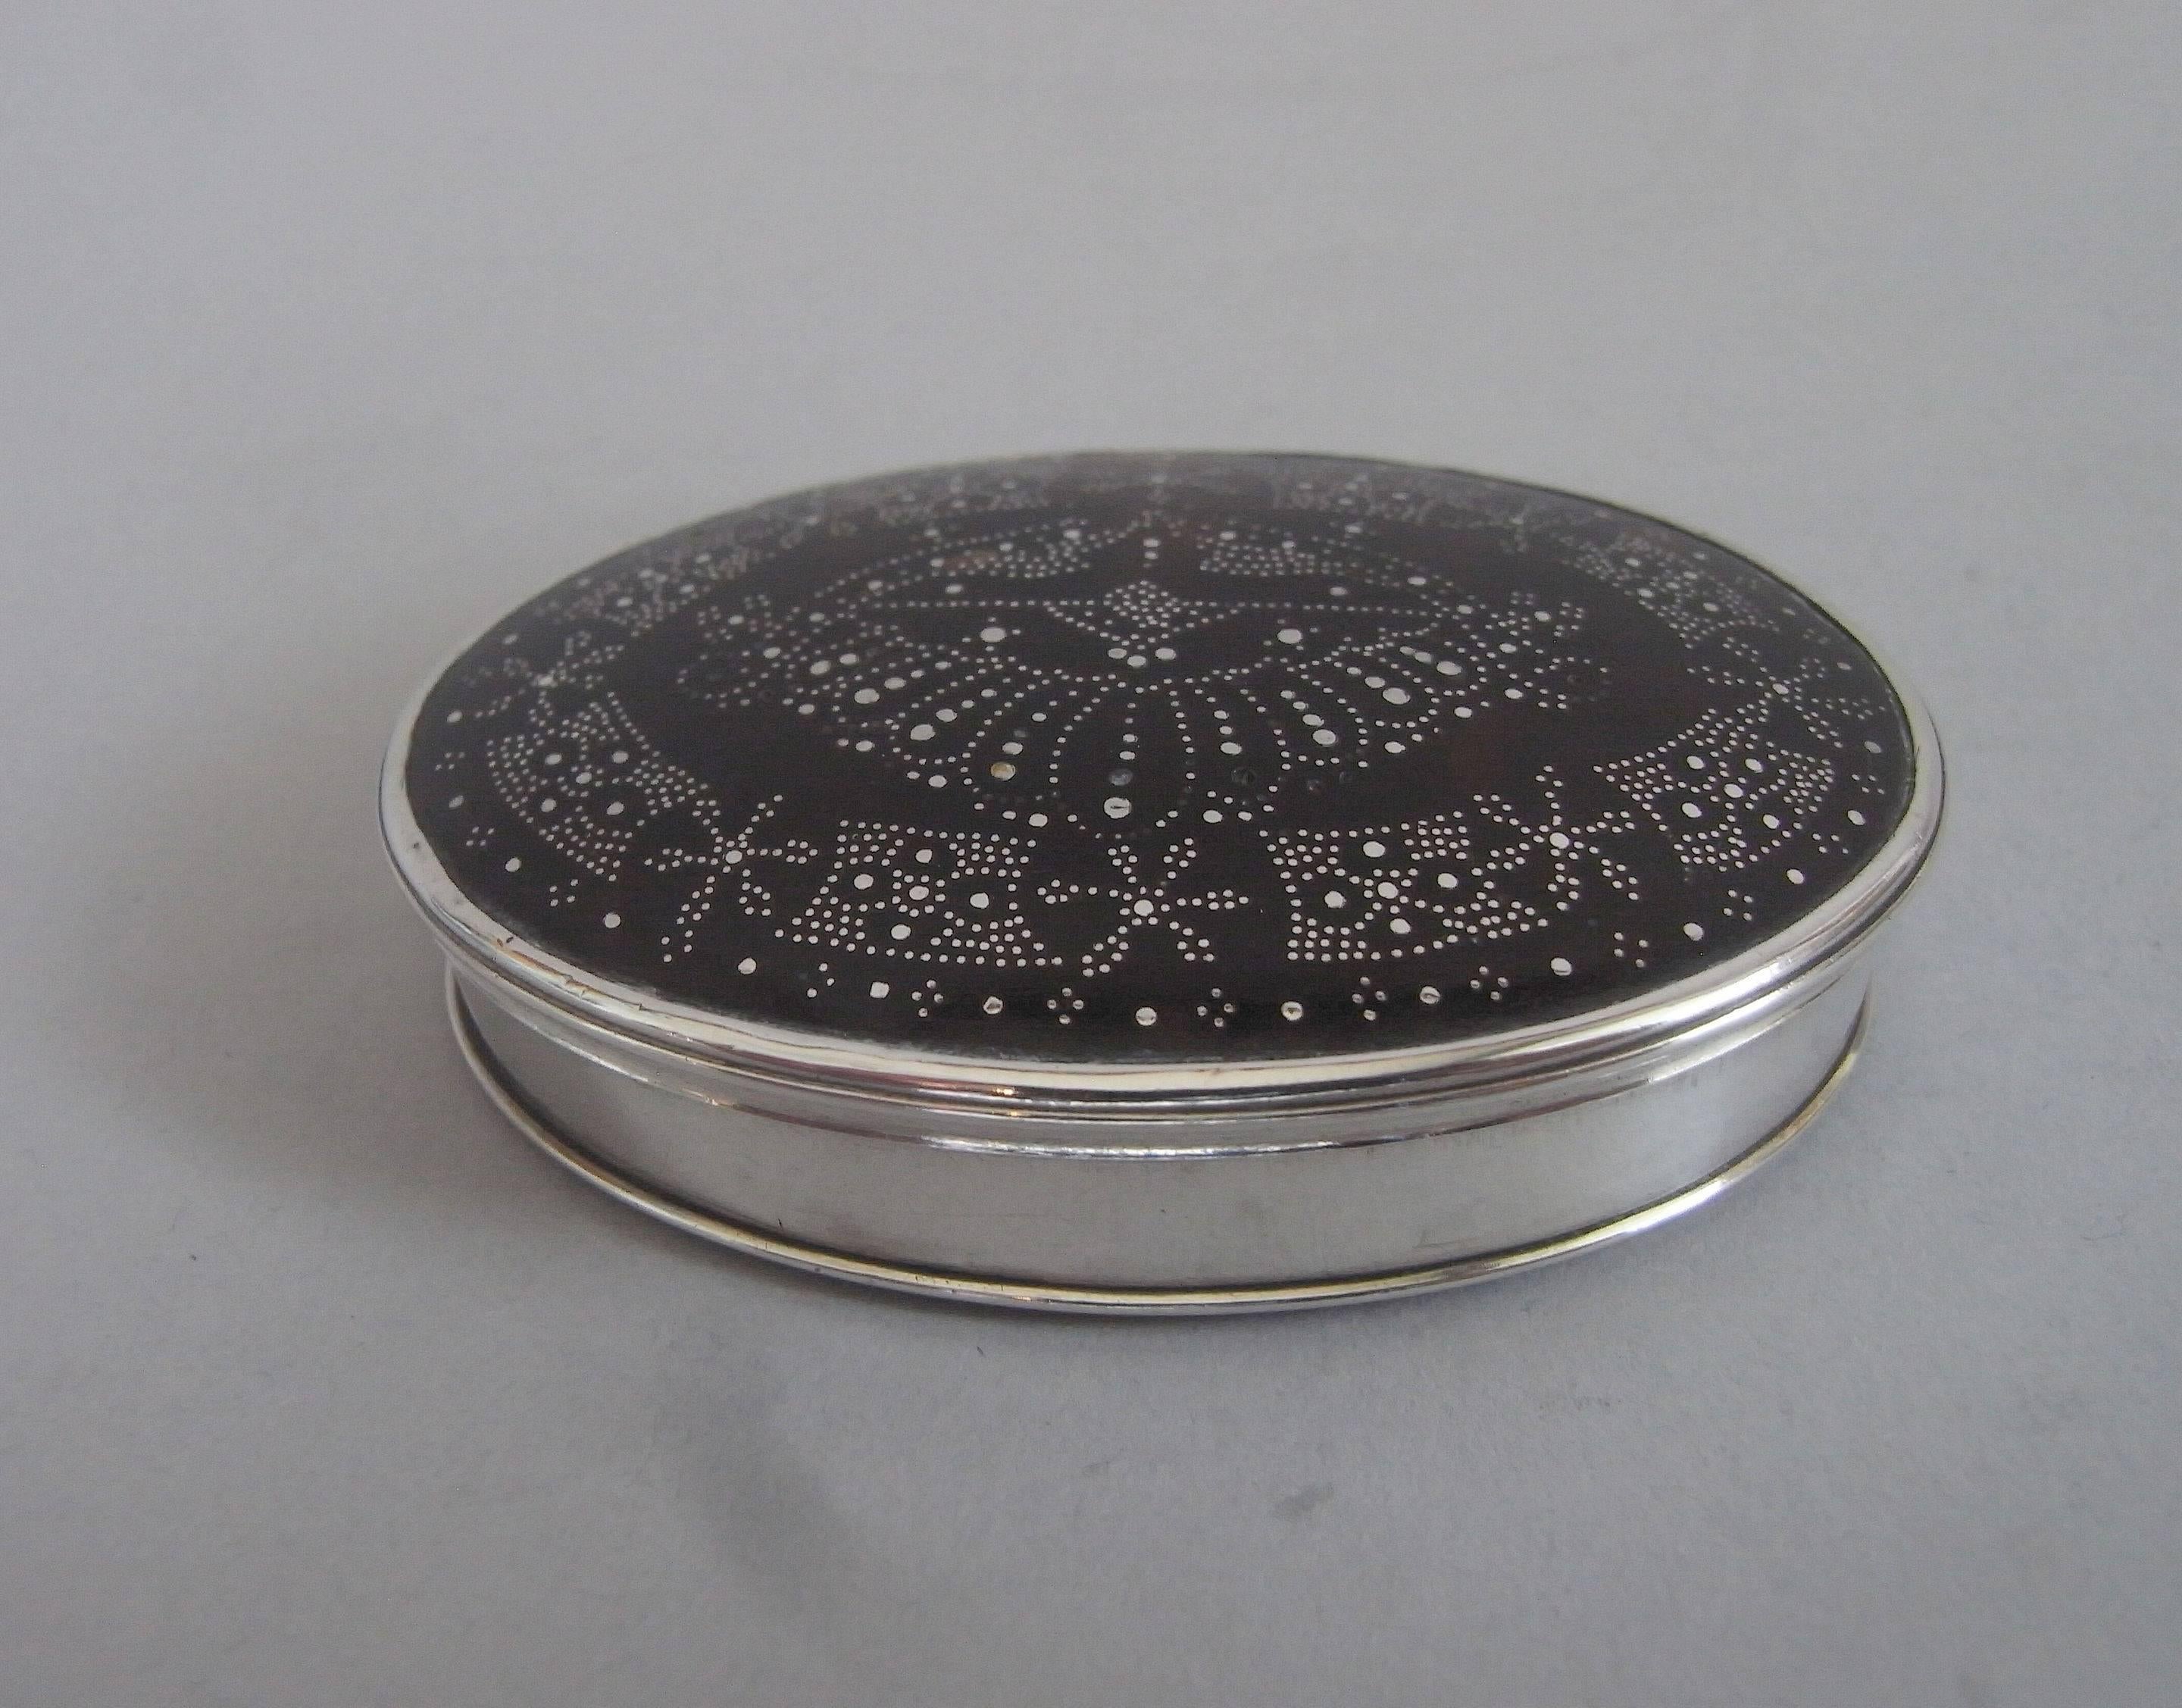 The snuff box is of a most unusual size and was most probably for the use of a Lady. This example is oval in form, with silver sides and hinge. The tortoiseshell base and cover are secured in place by a silver oval frame. The base displays a plain